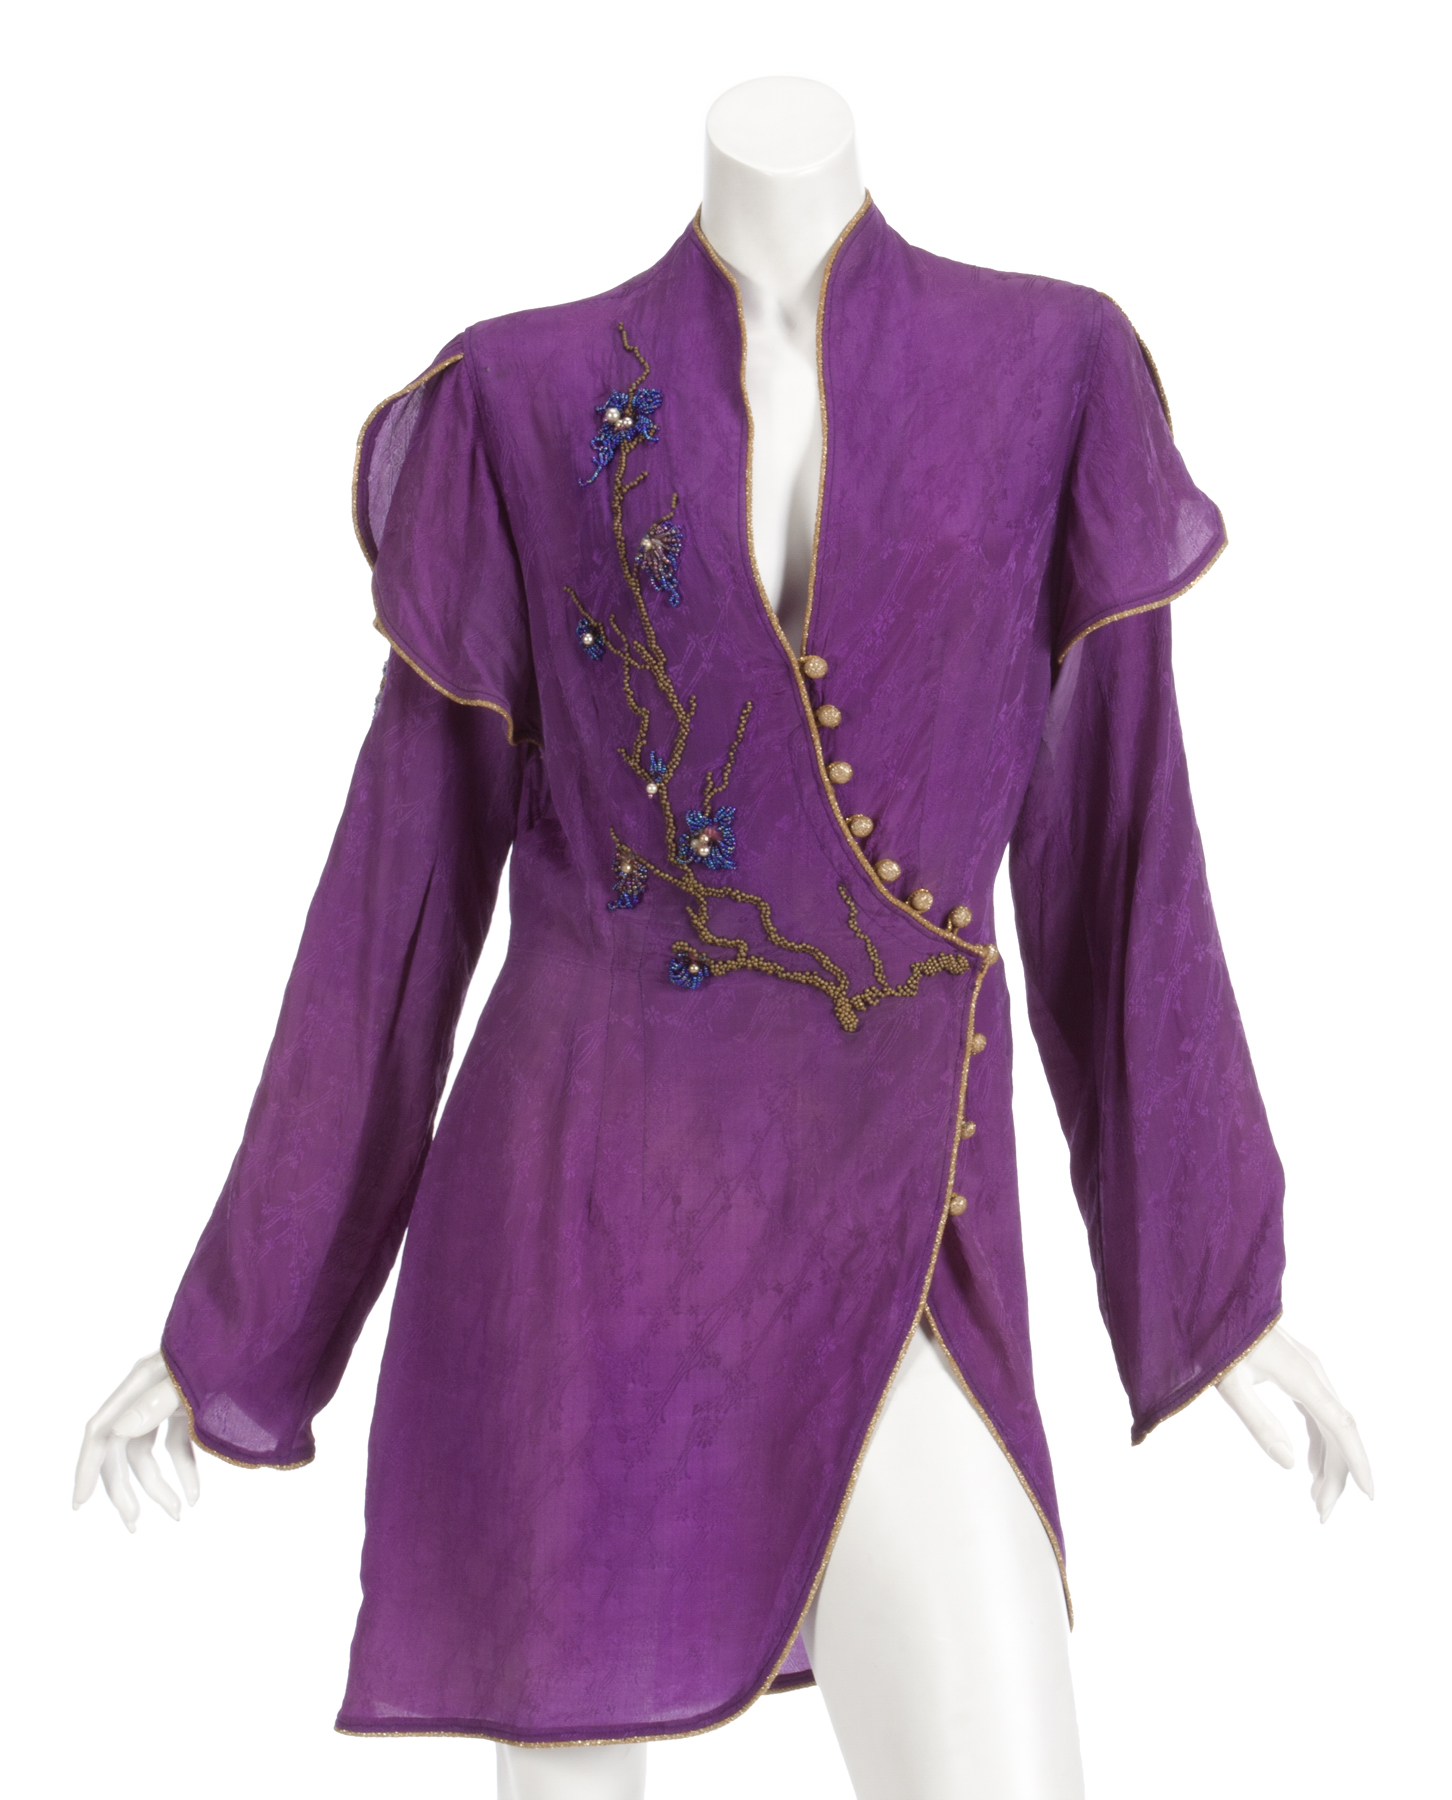 ANN WILSON STAGE AND MAGAZINE WORN BLOUSE WITH MAGAZINE A violet silk custom made blouse stage